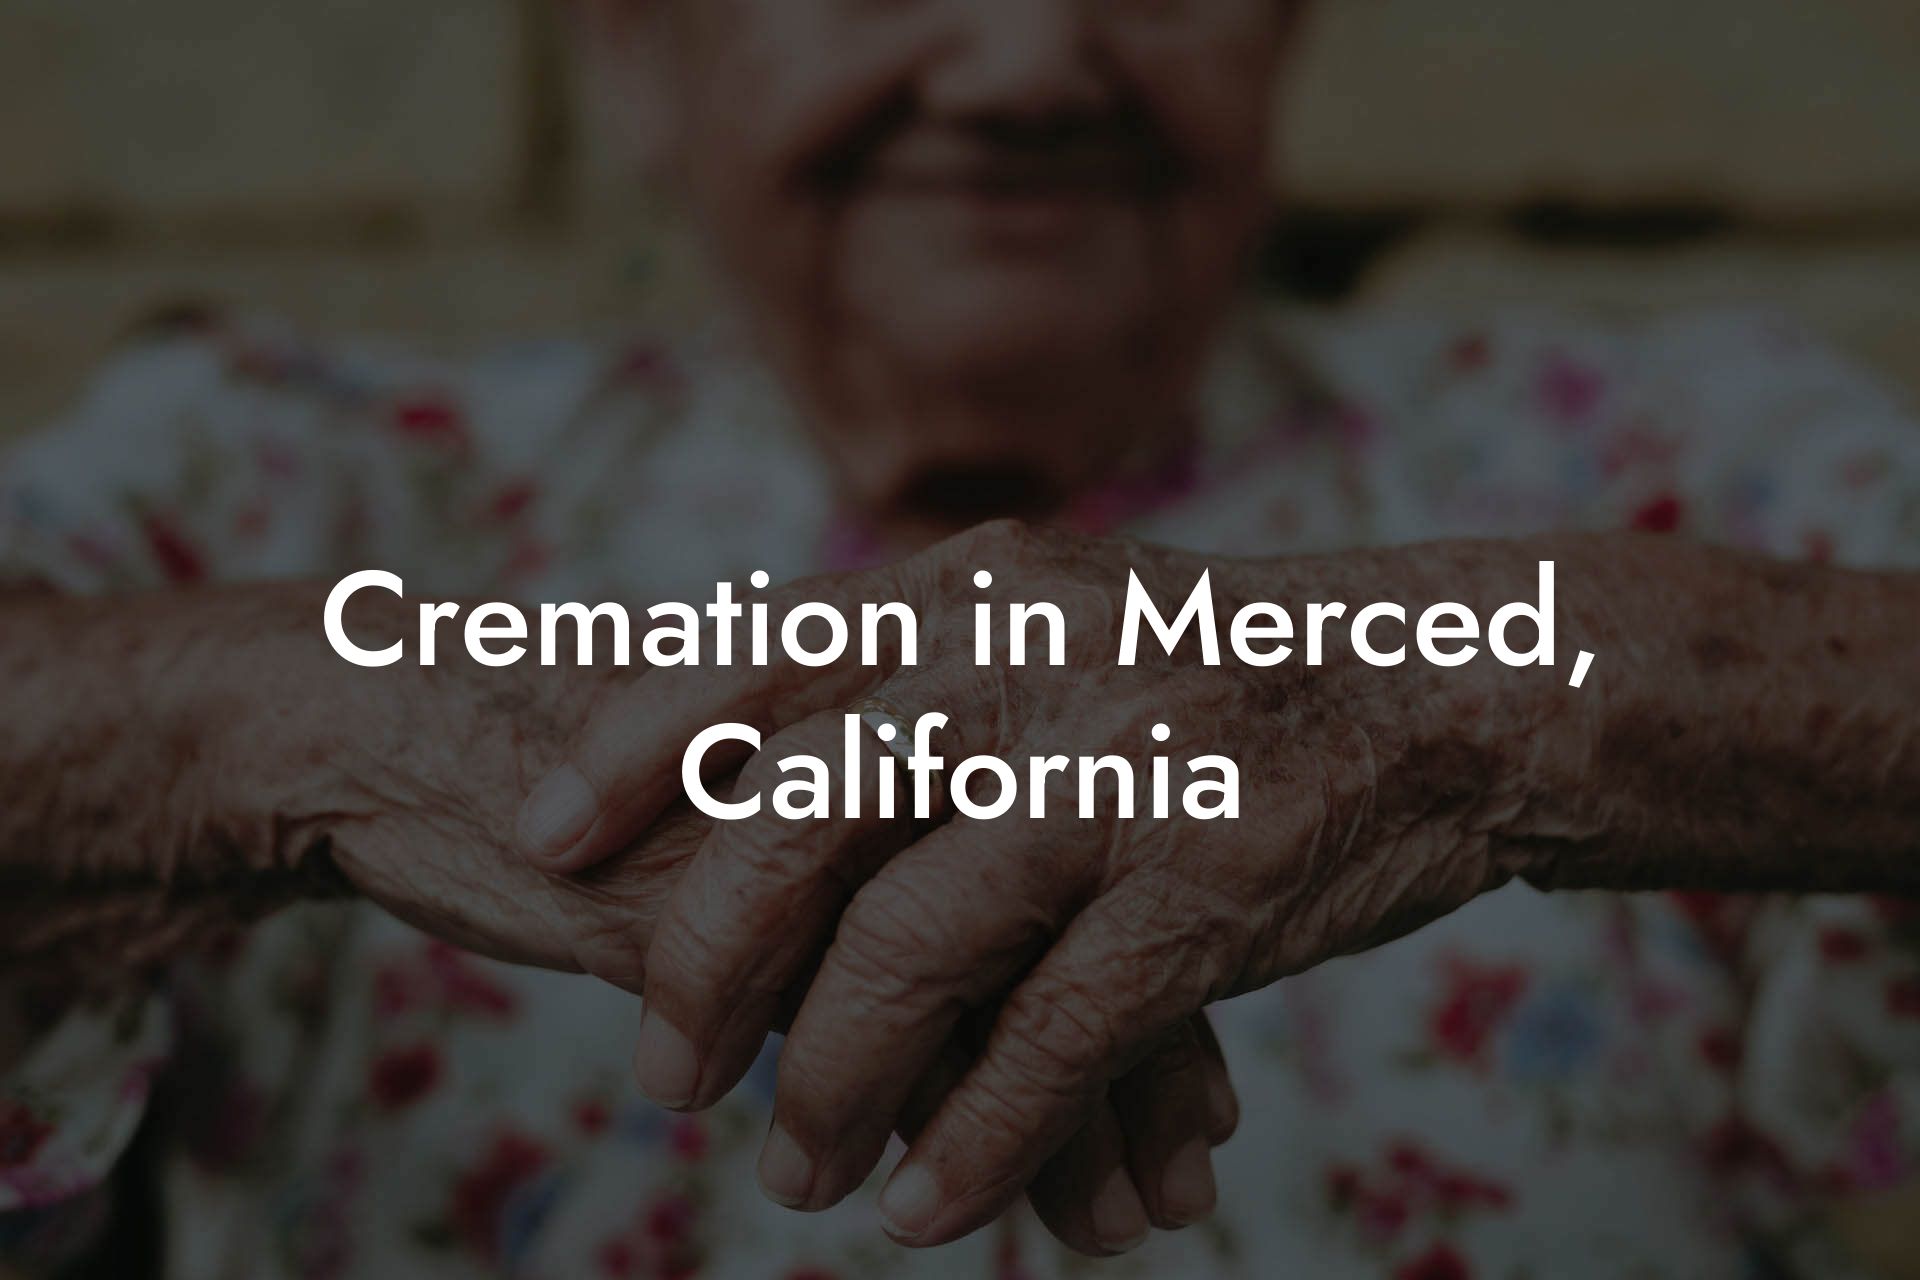 Cremation in Merced, California